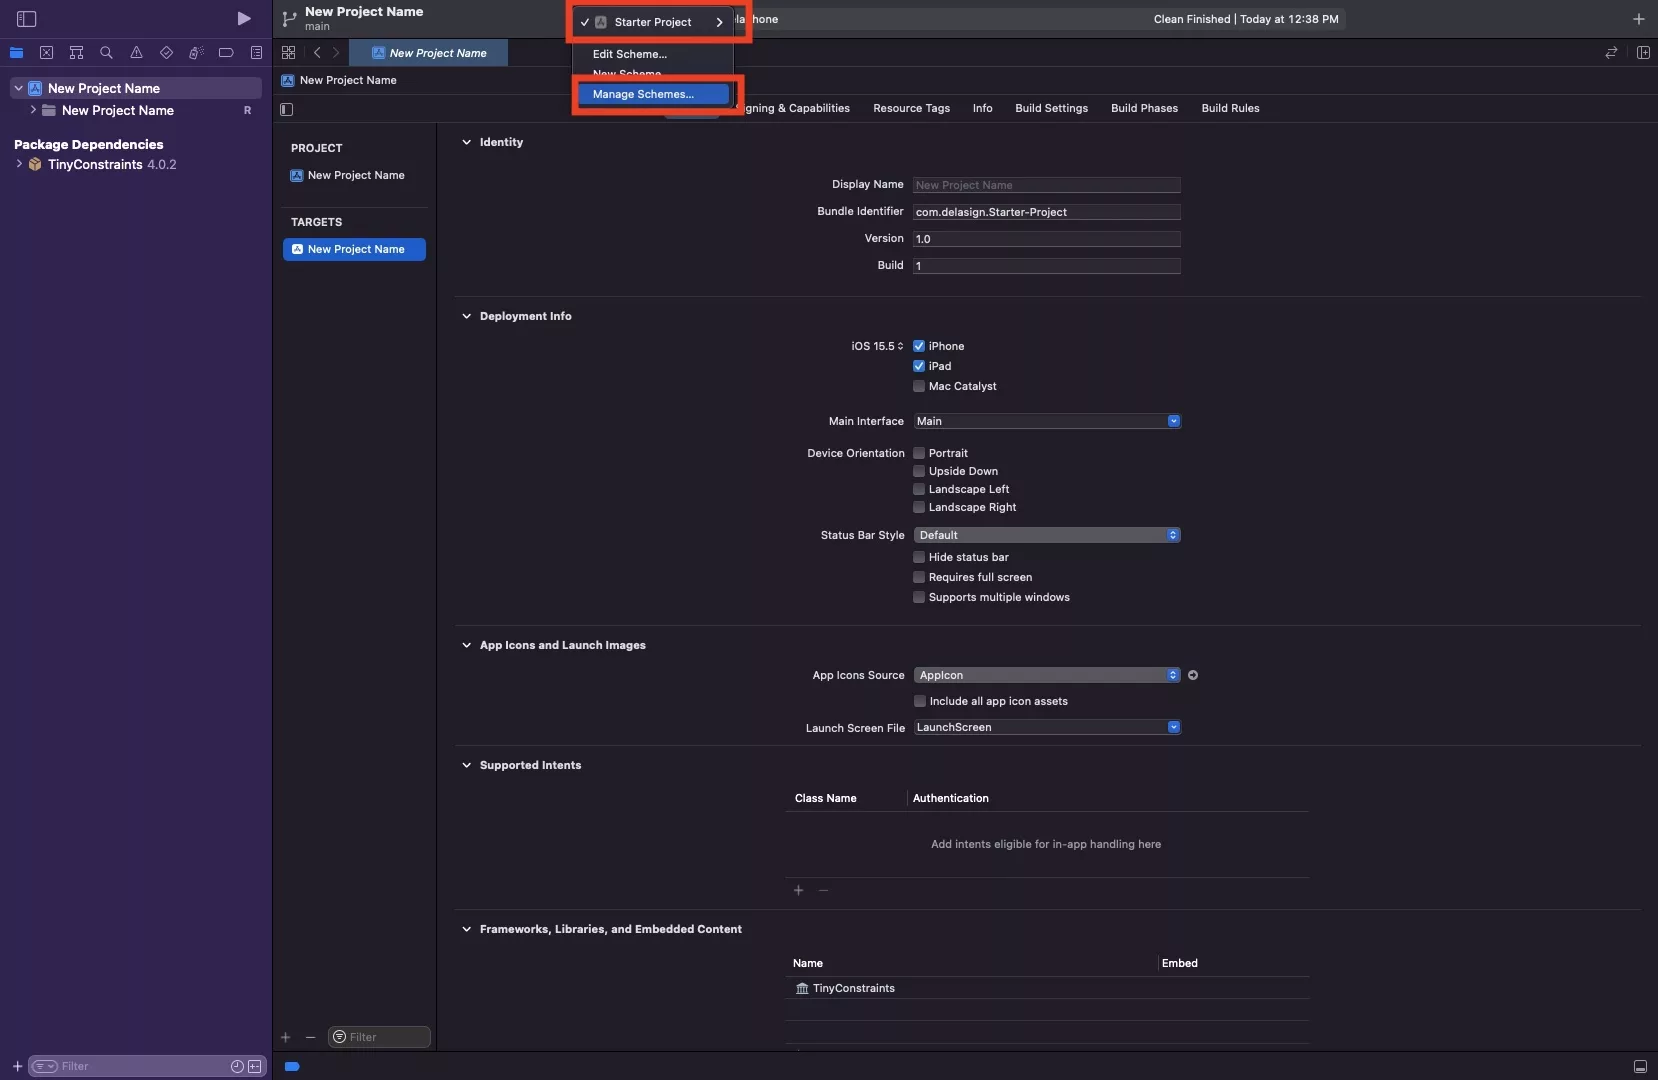 A screenshot showing you how to navigate to manage schemes in Xcode.